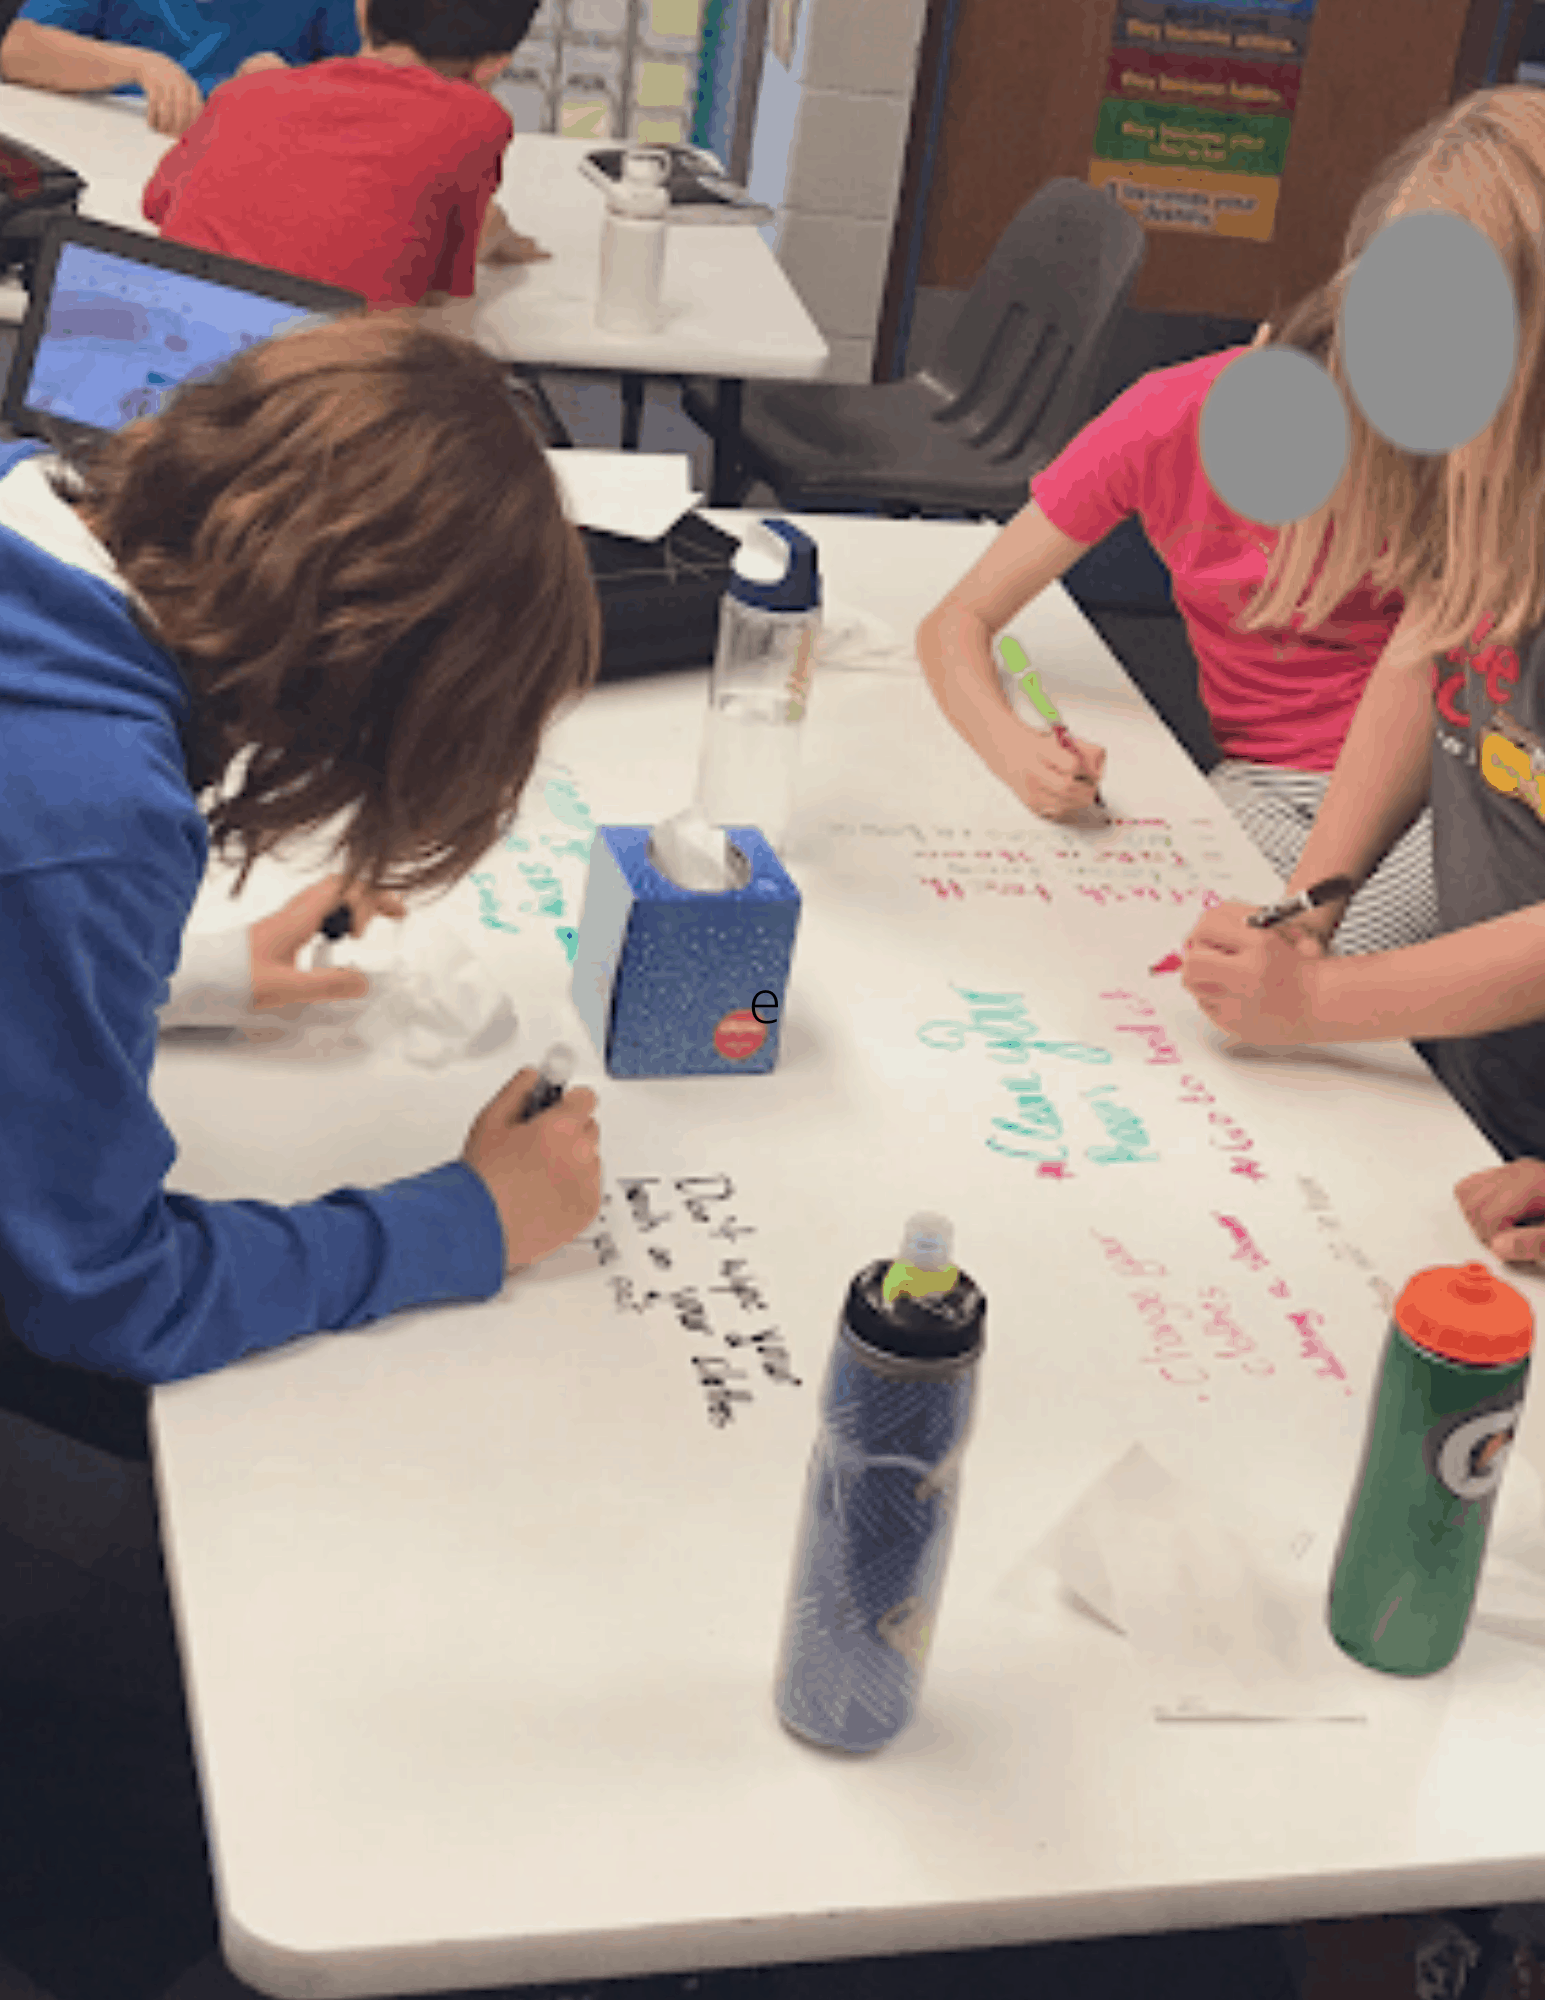 Innovation in the classroom idea - using whiteboard paint on tables